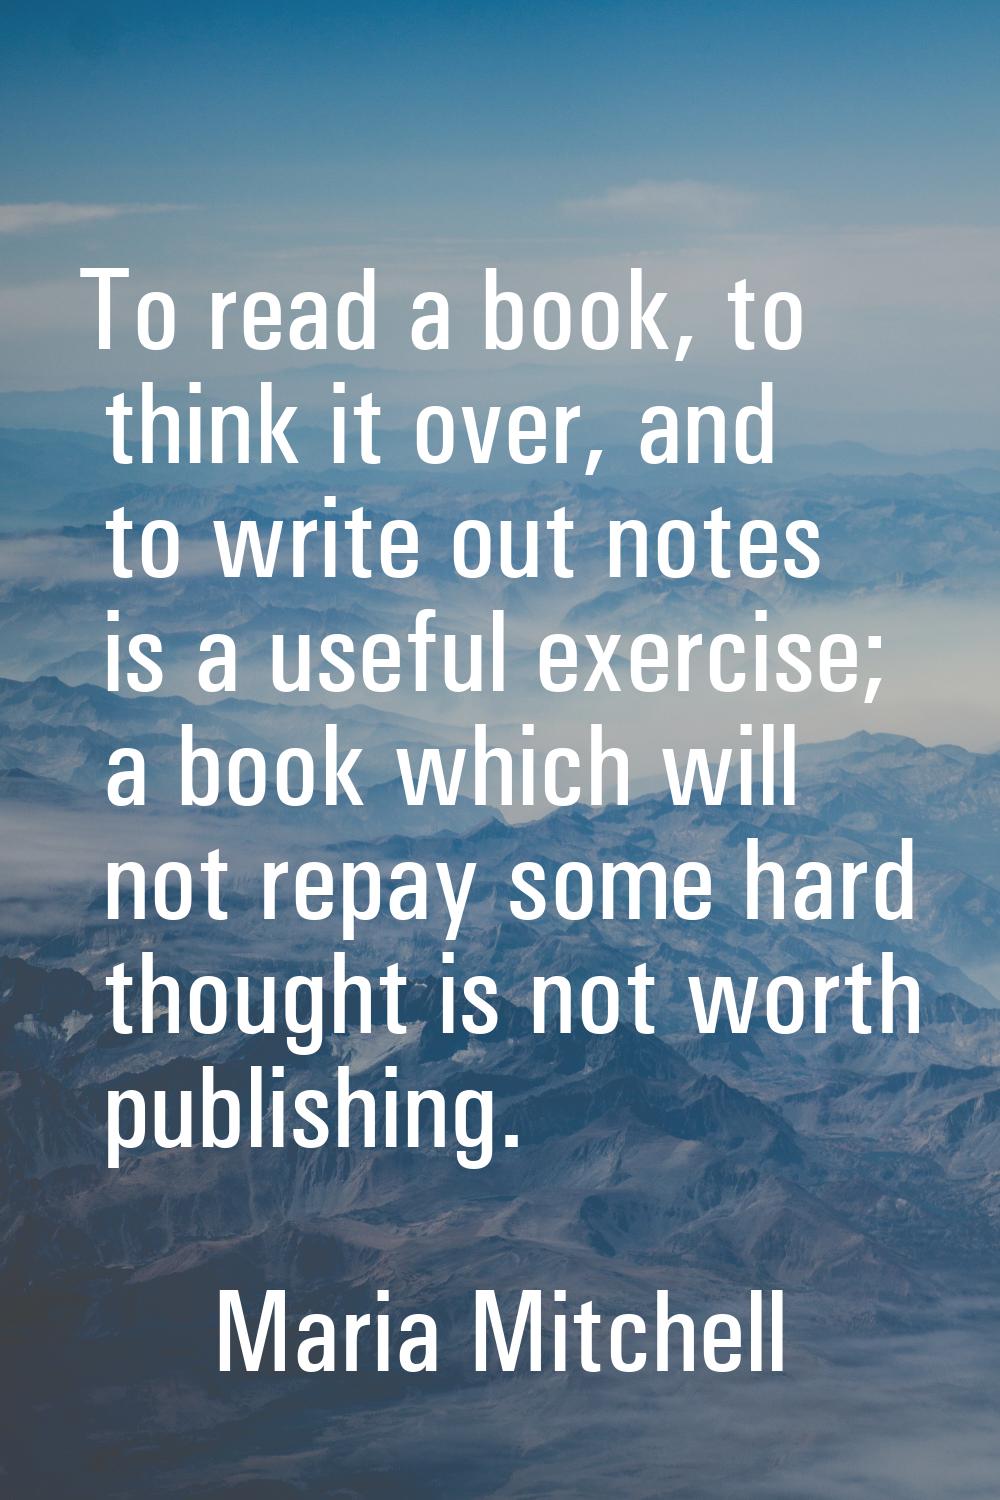 To read a book, to think it over, and to write out notes is a useful exercise; a book which will no